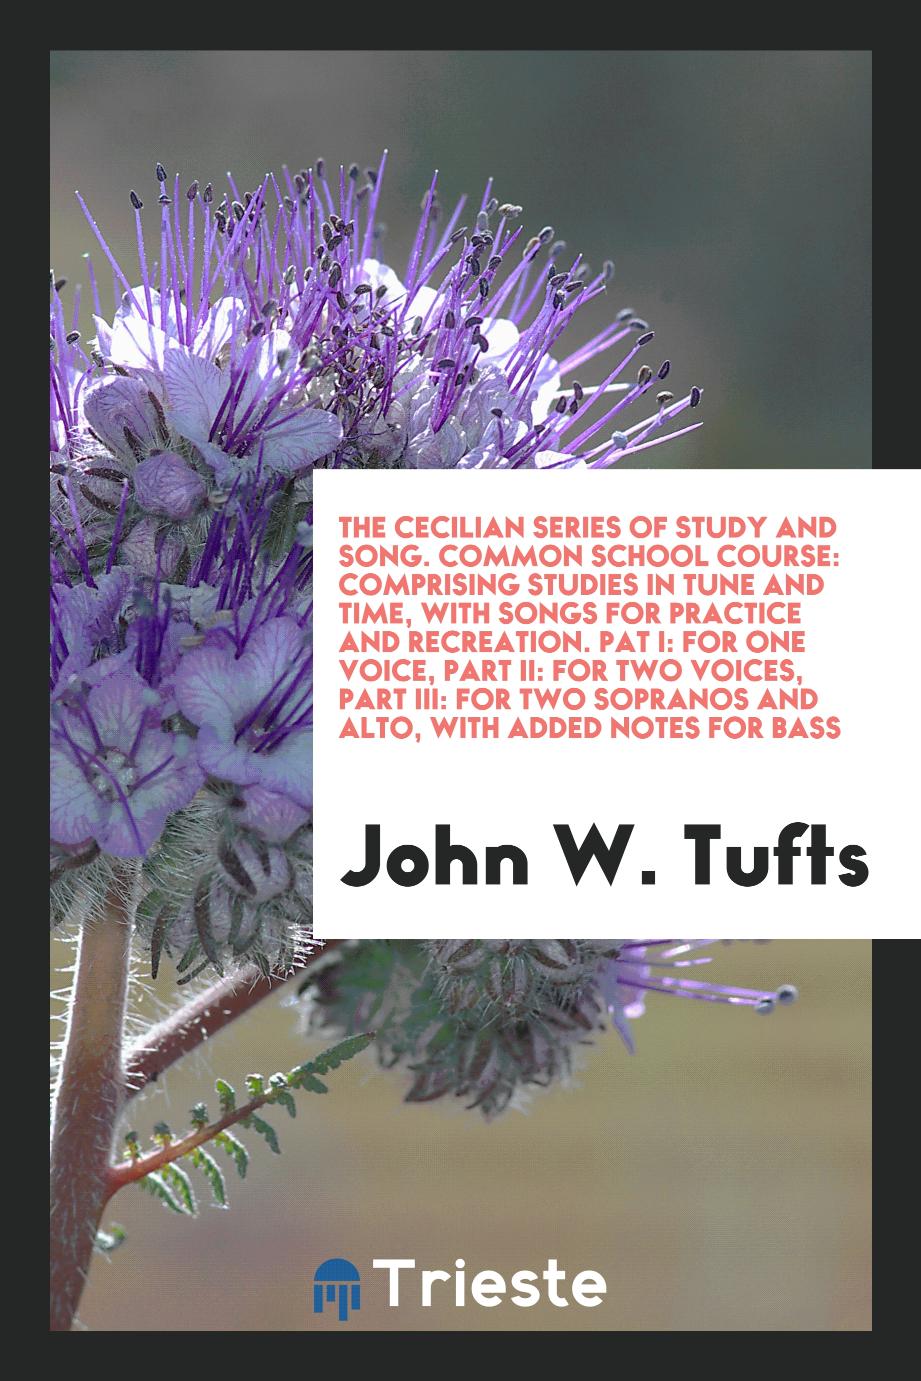 The Cecilian Series of Study and Song. Common School Course: Comprising Studies in Tune and Time, with Songs for Practice and Recreation. Pat I: For One Voice, Part II: For Two Voices, Part III: For Two Sopranos and Alto, with Added Notes for Bass